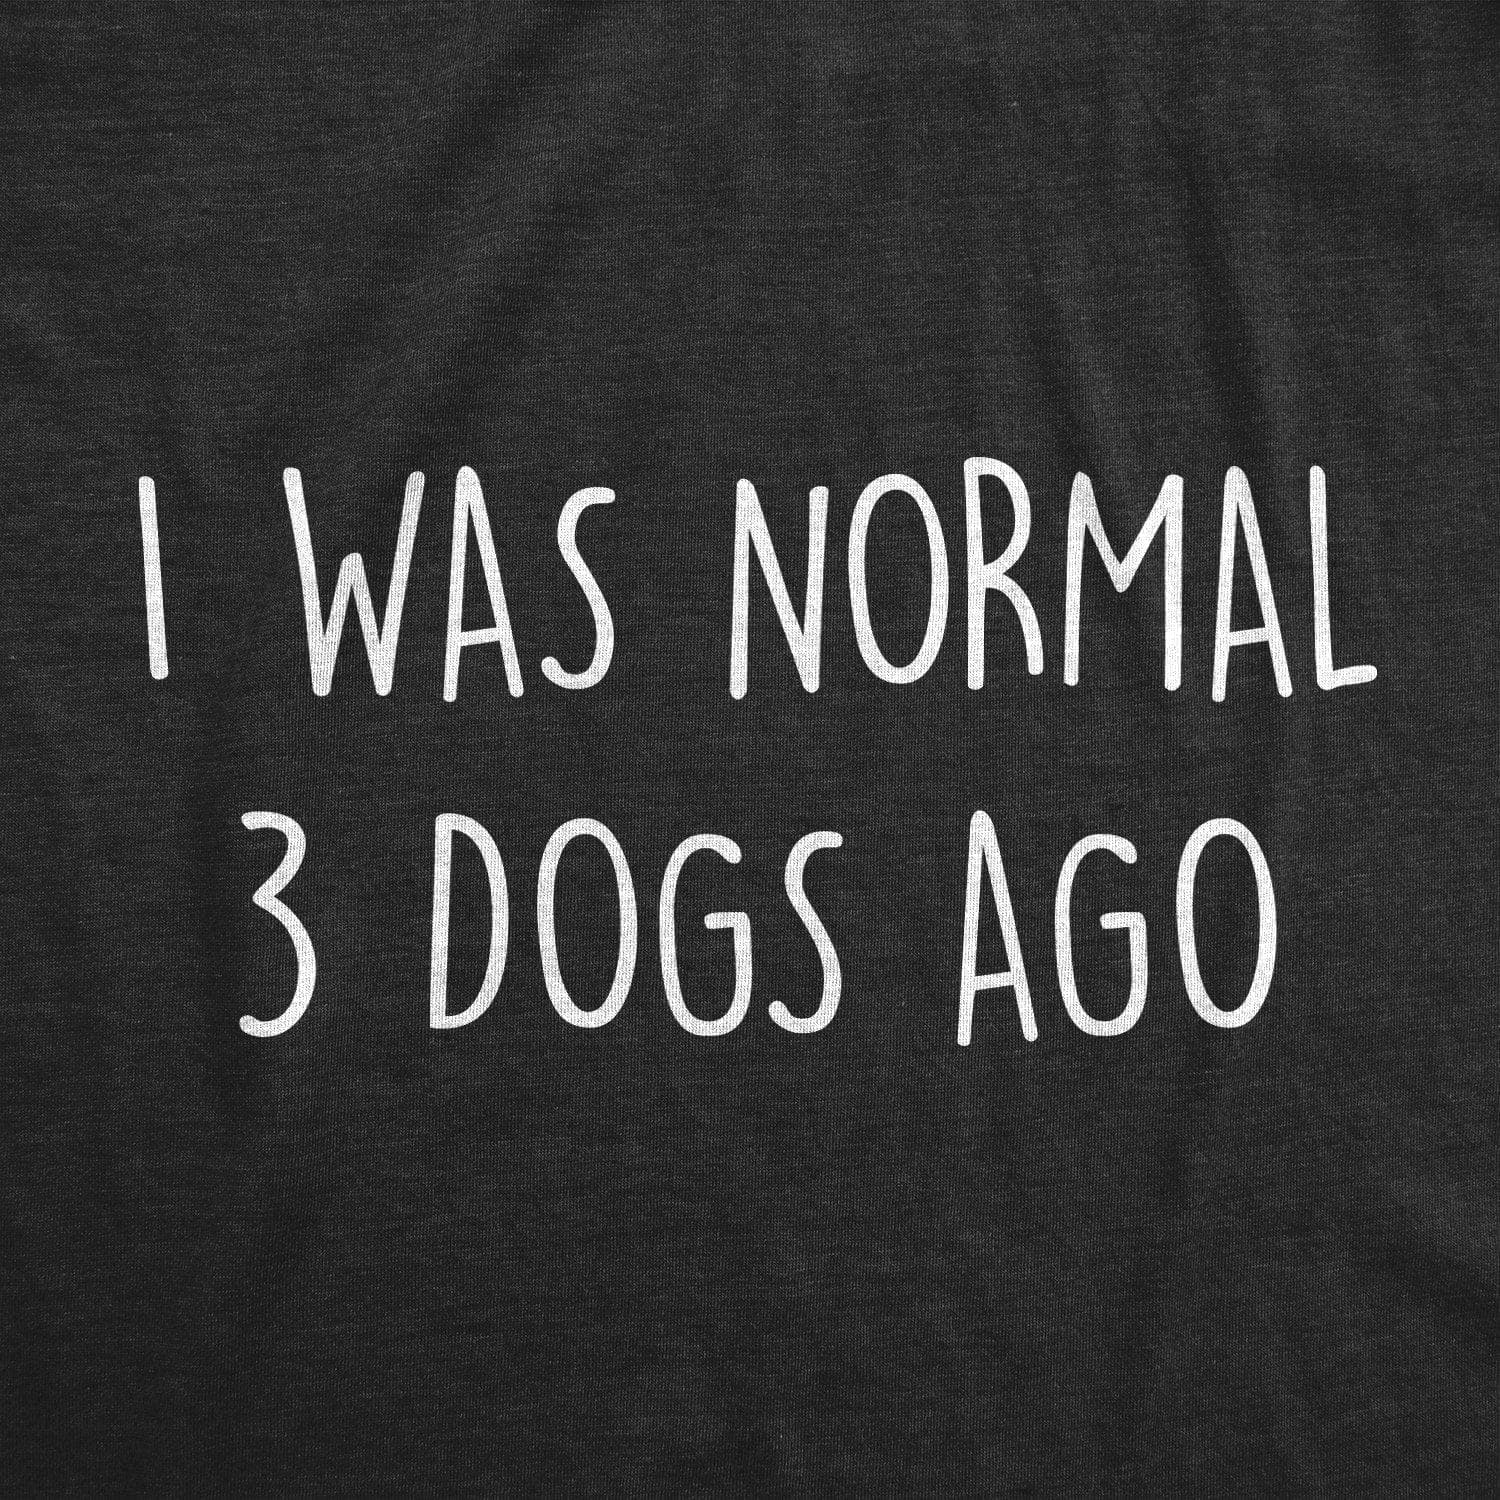 I Was Normal 3 Dogs Ago Women's Tshirt  -  Crazy Dog T-Shirts